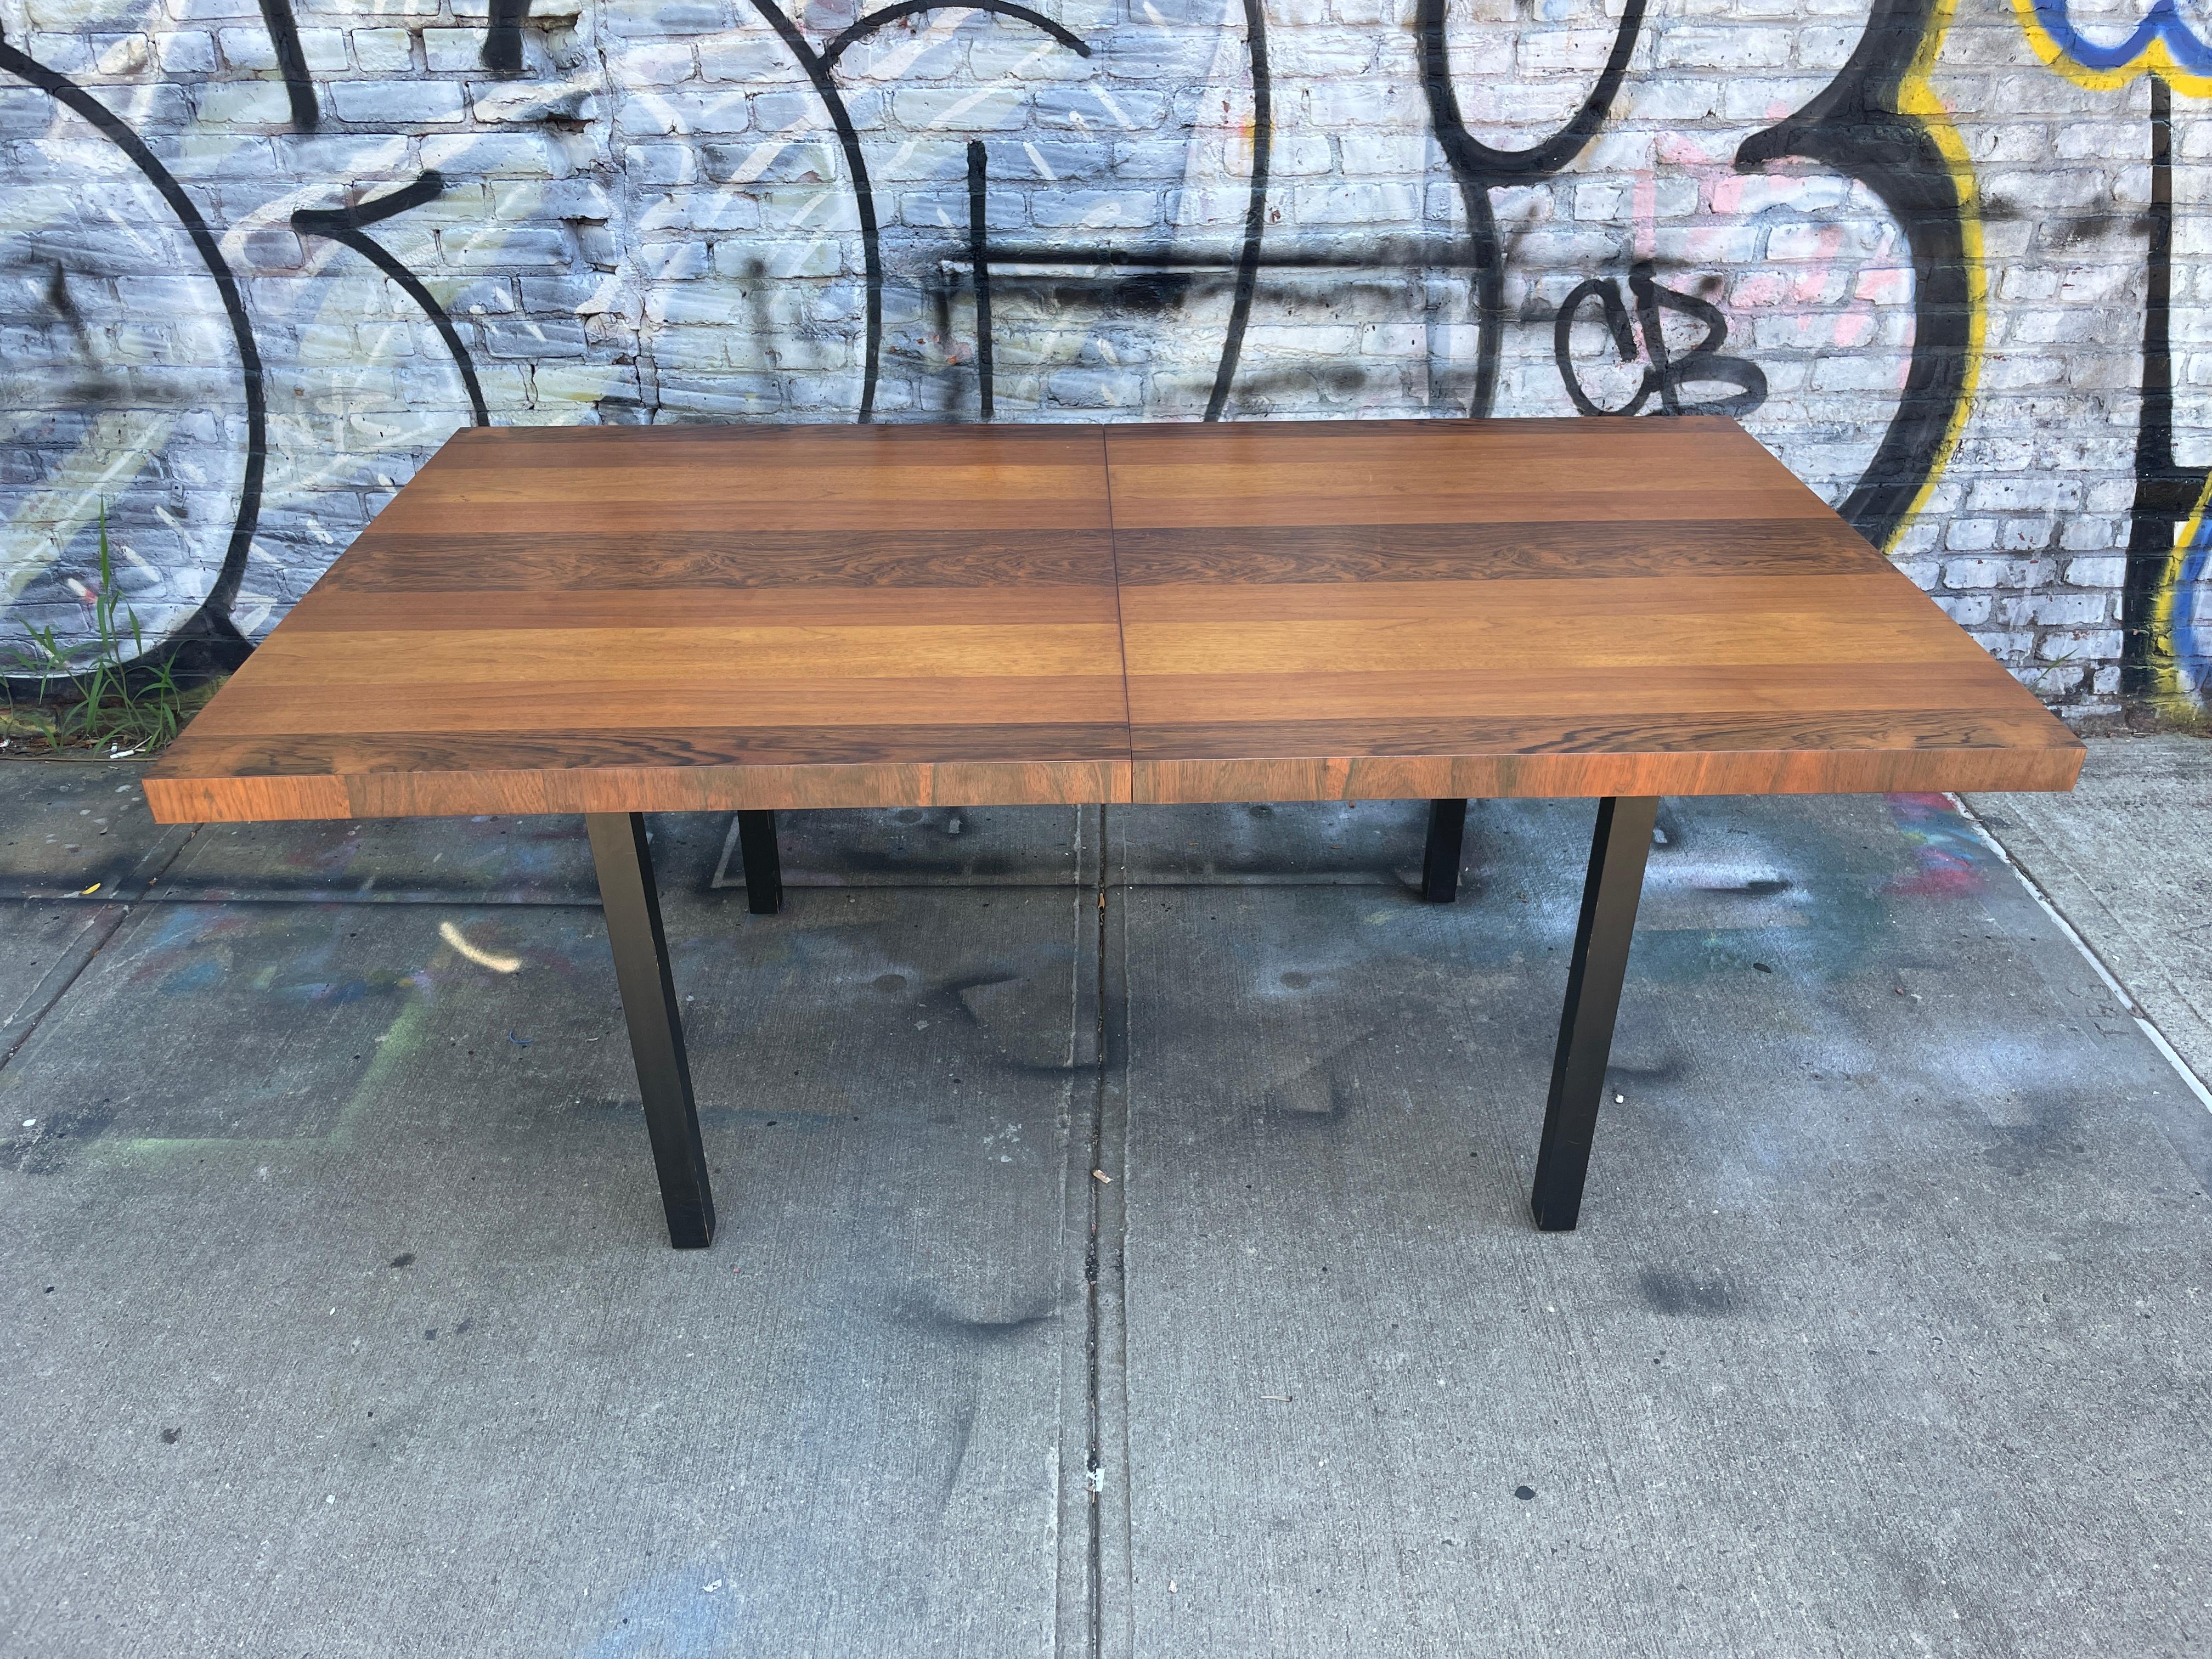 Mid-Century Modern American Danish style dining table by Milo Baughman. Beautiful tri-wood veneer table made in USA. Amazing teak, rosewood and walnut table. Made circa 1960 all black lacquered solid wood legs. Original finish in excellent vintage